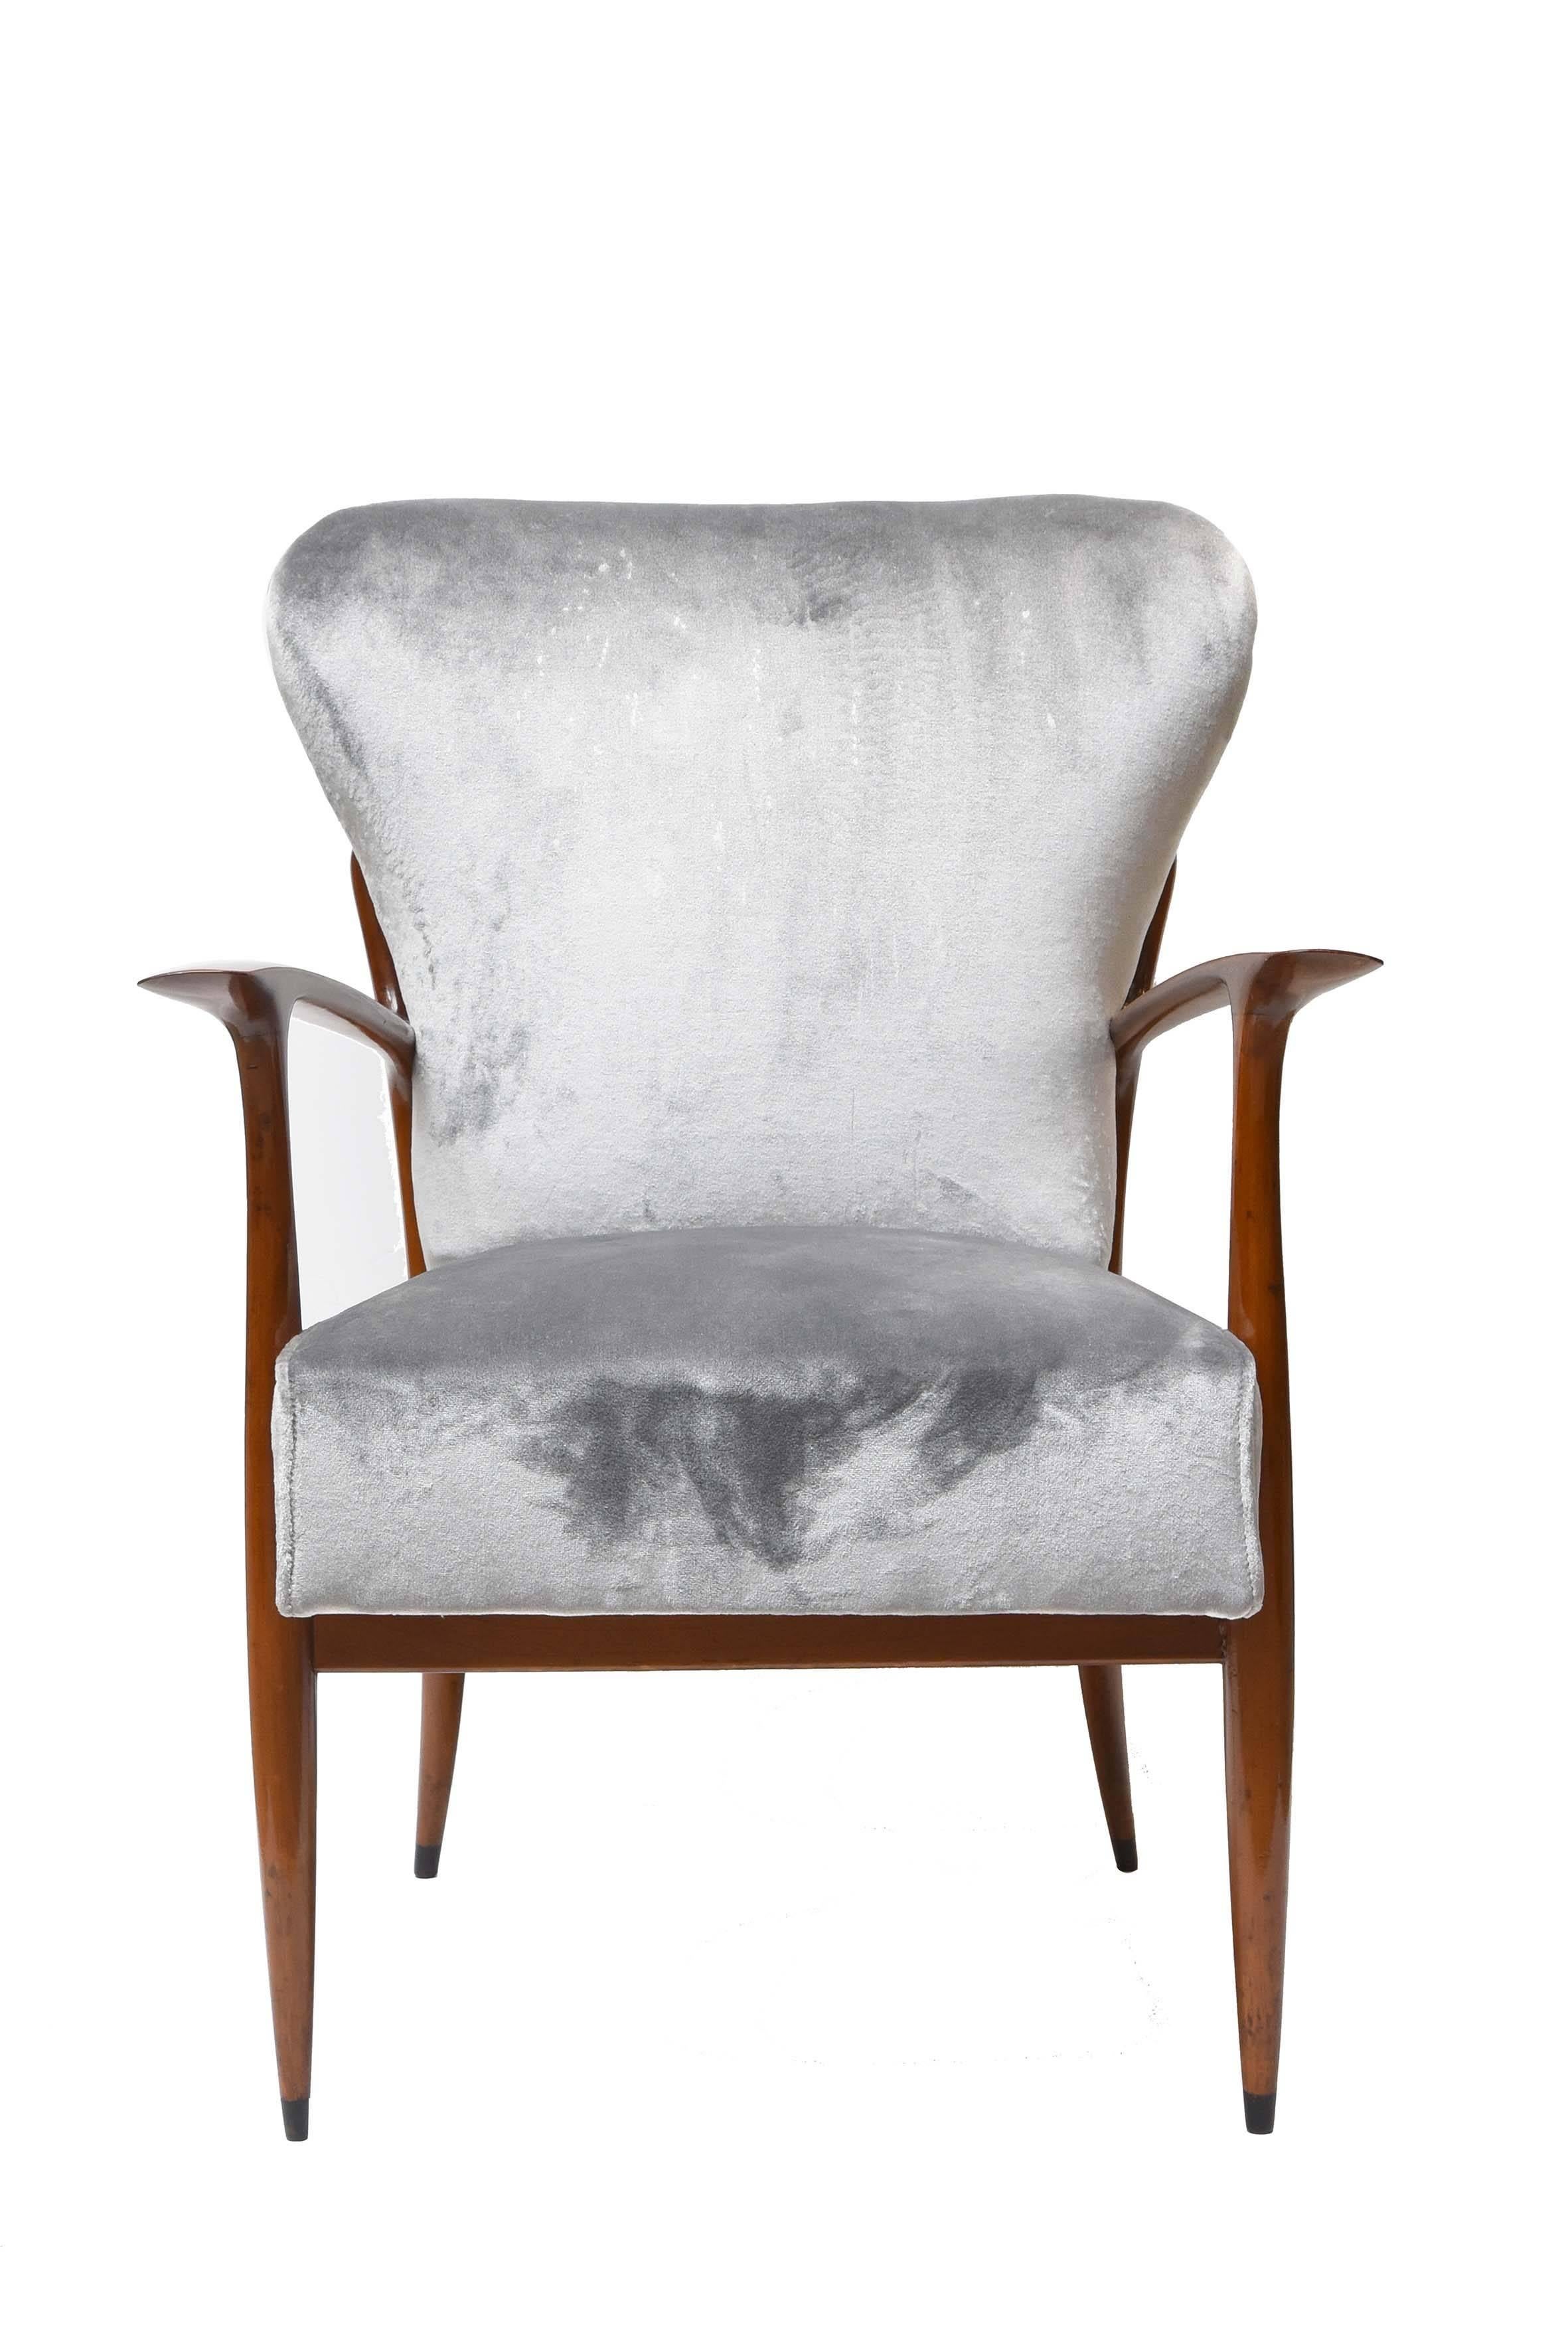 Pair of Ico Parisi Cherry Wood and Grey Velvet Fabric Italian Armchairs, 1950s  For Sale 3